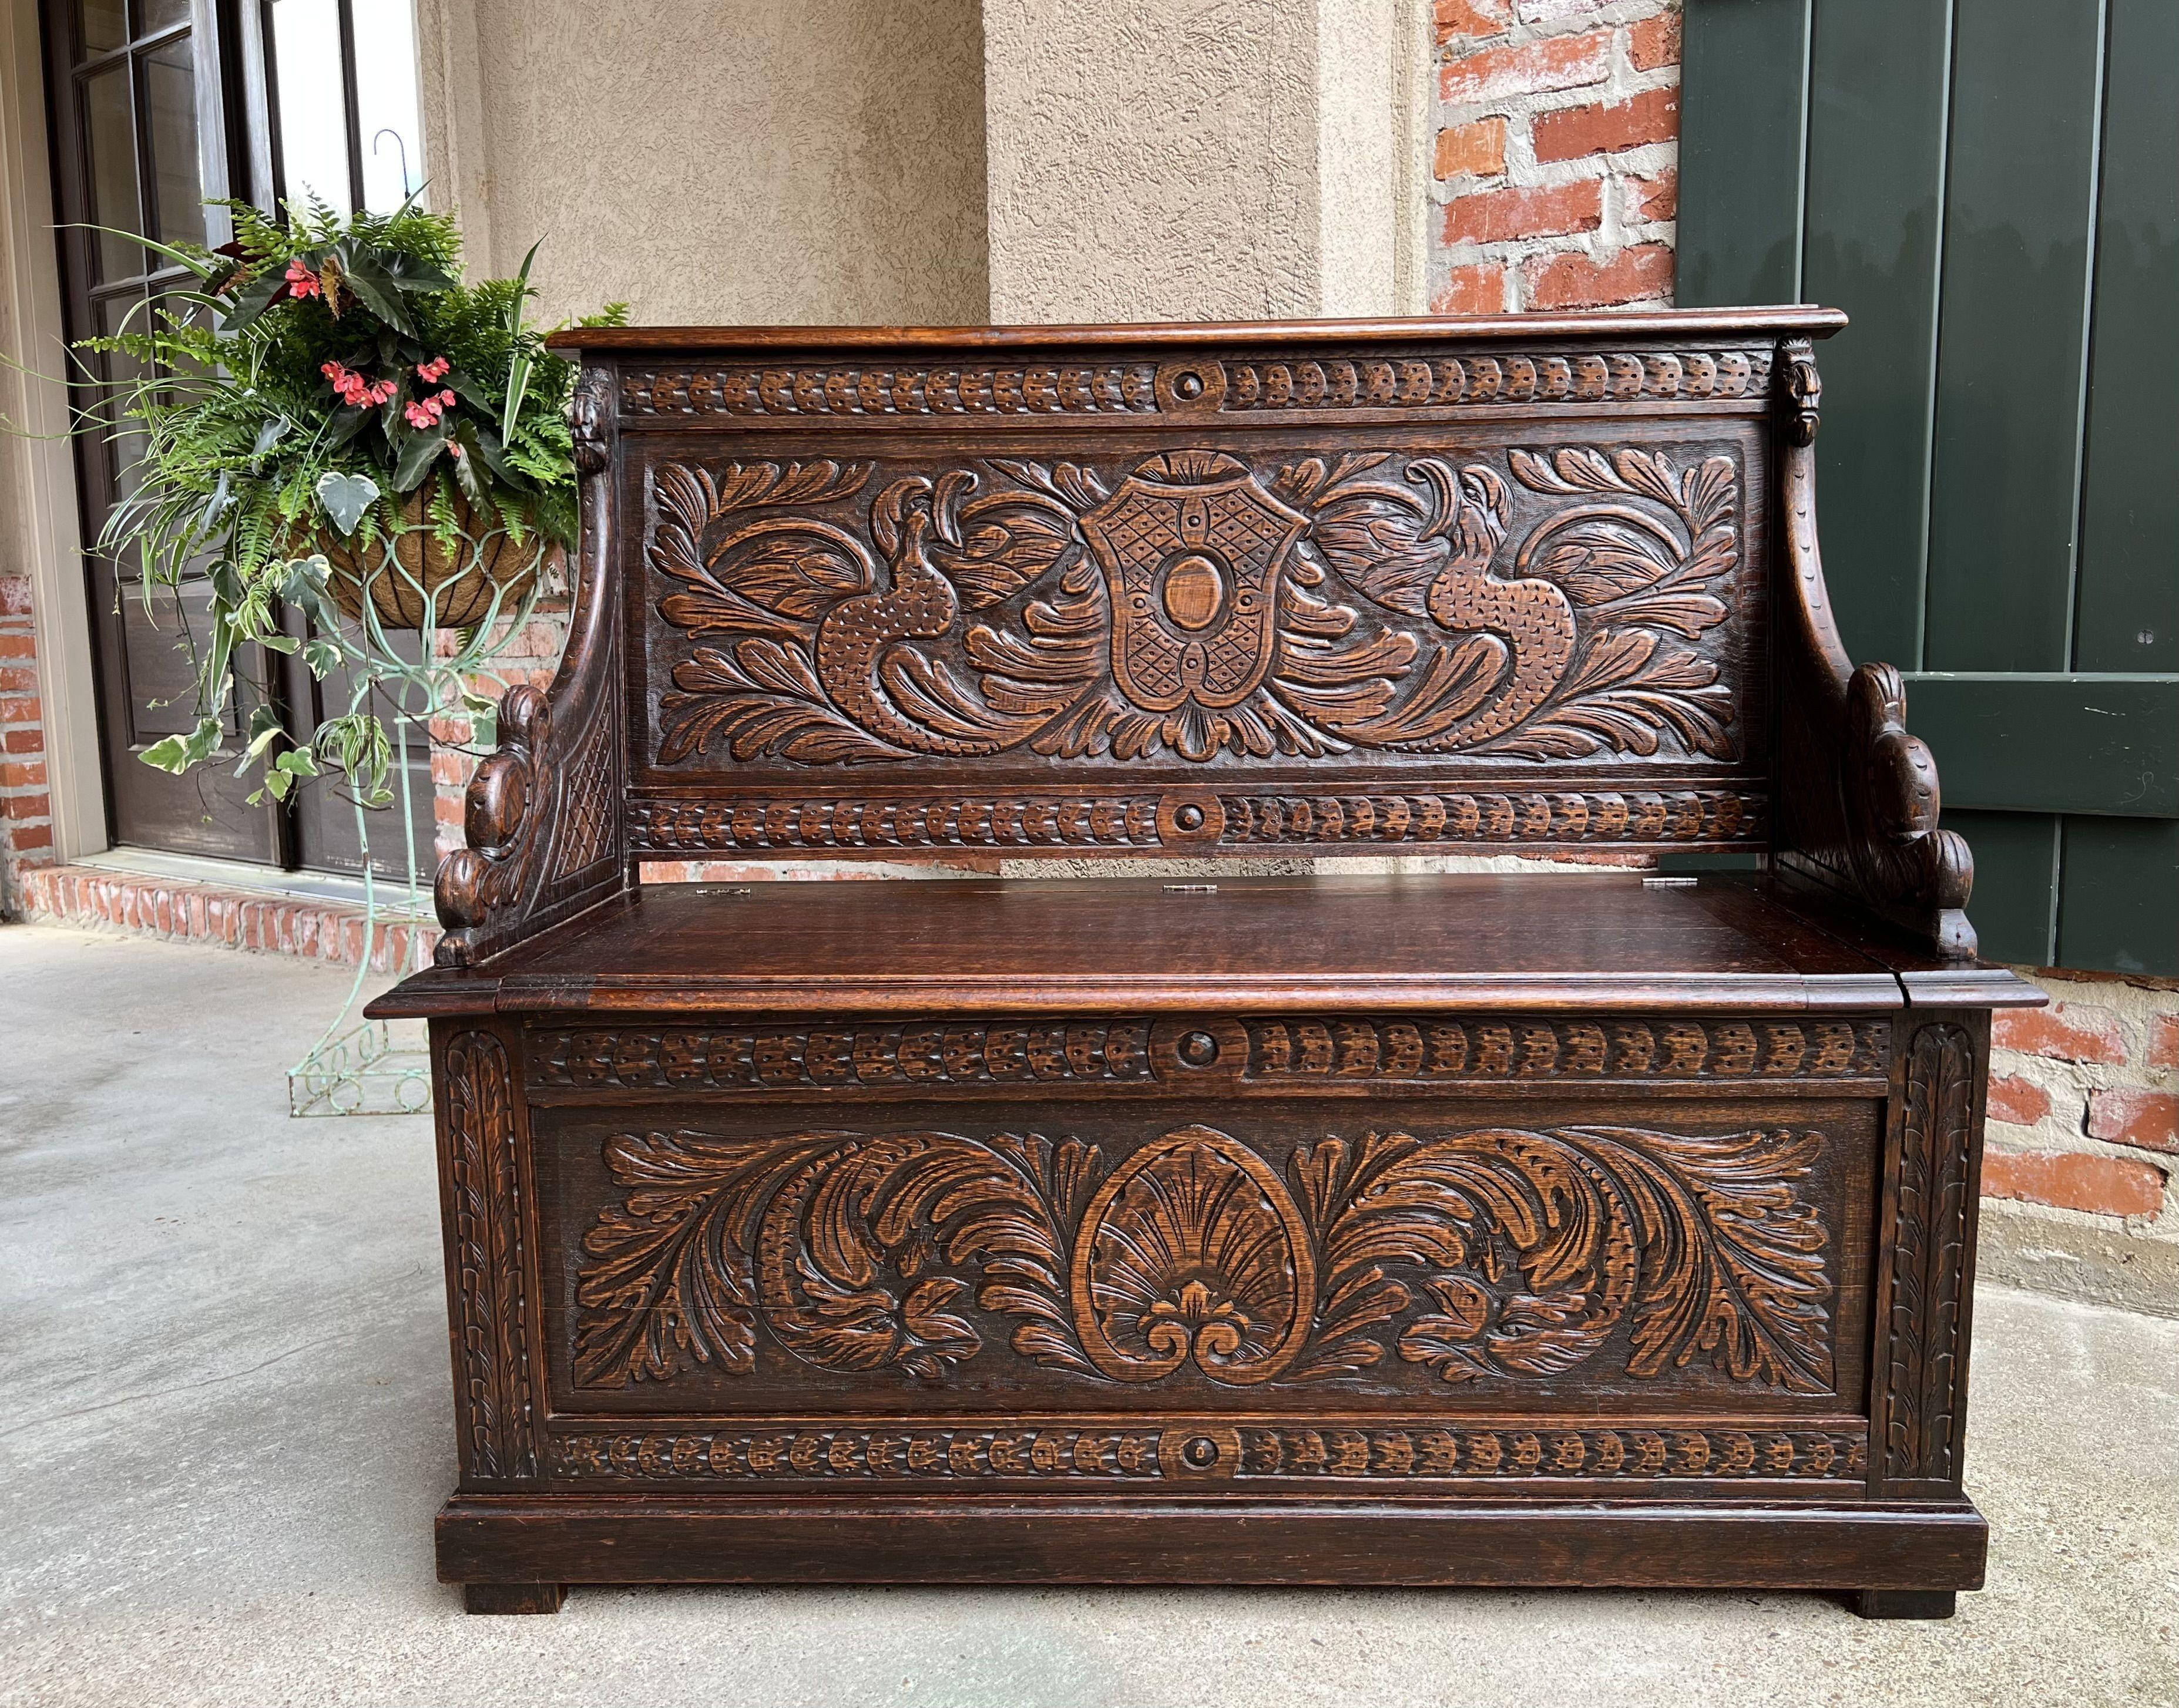 Antique French carved oak hall bench renaissance gothic chapel.

Direct from Europe, a lovely antique carved bench, with a great combination of style and size. Fully carved back, front and sides, in the same manner as the larger, high back antique